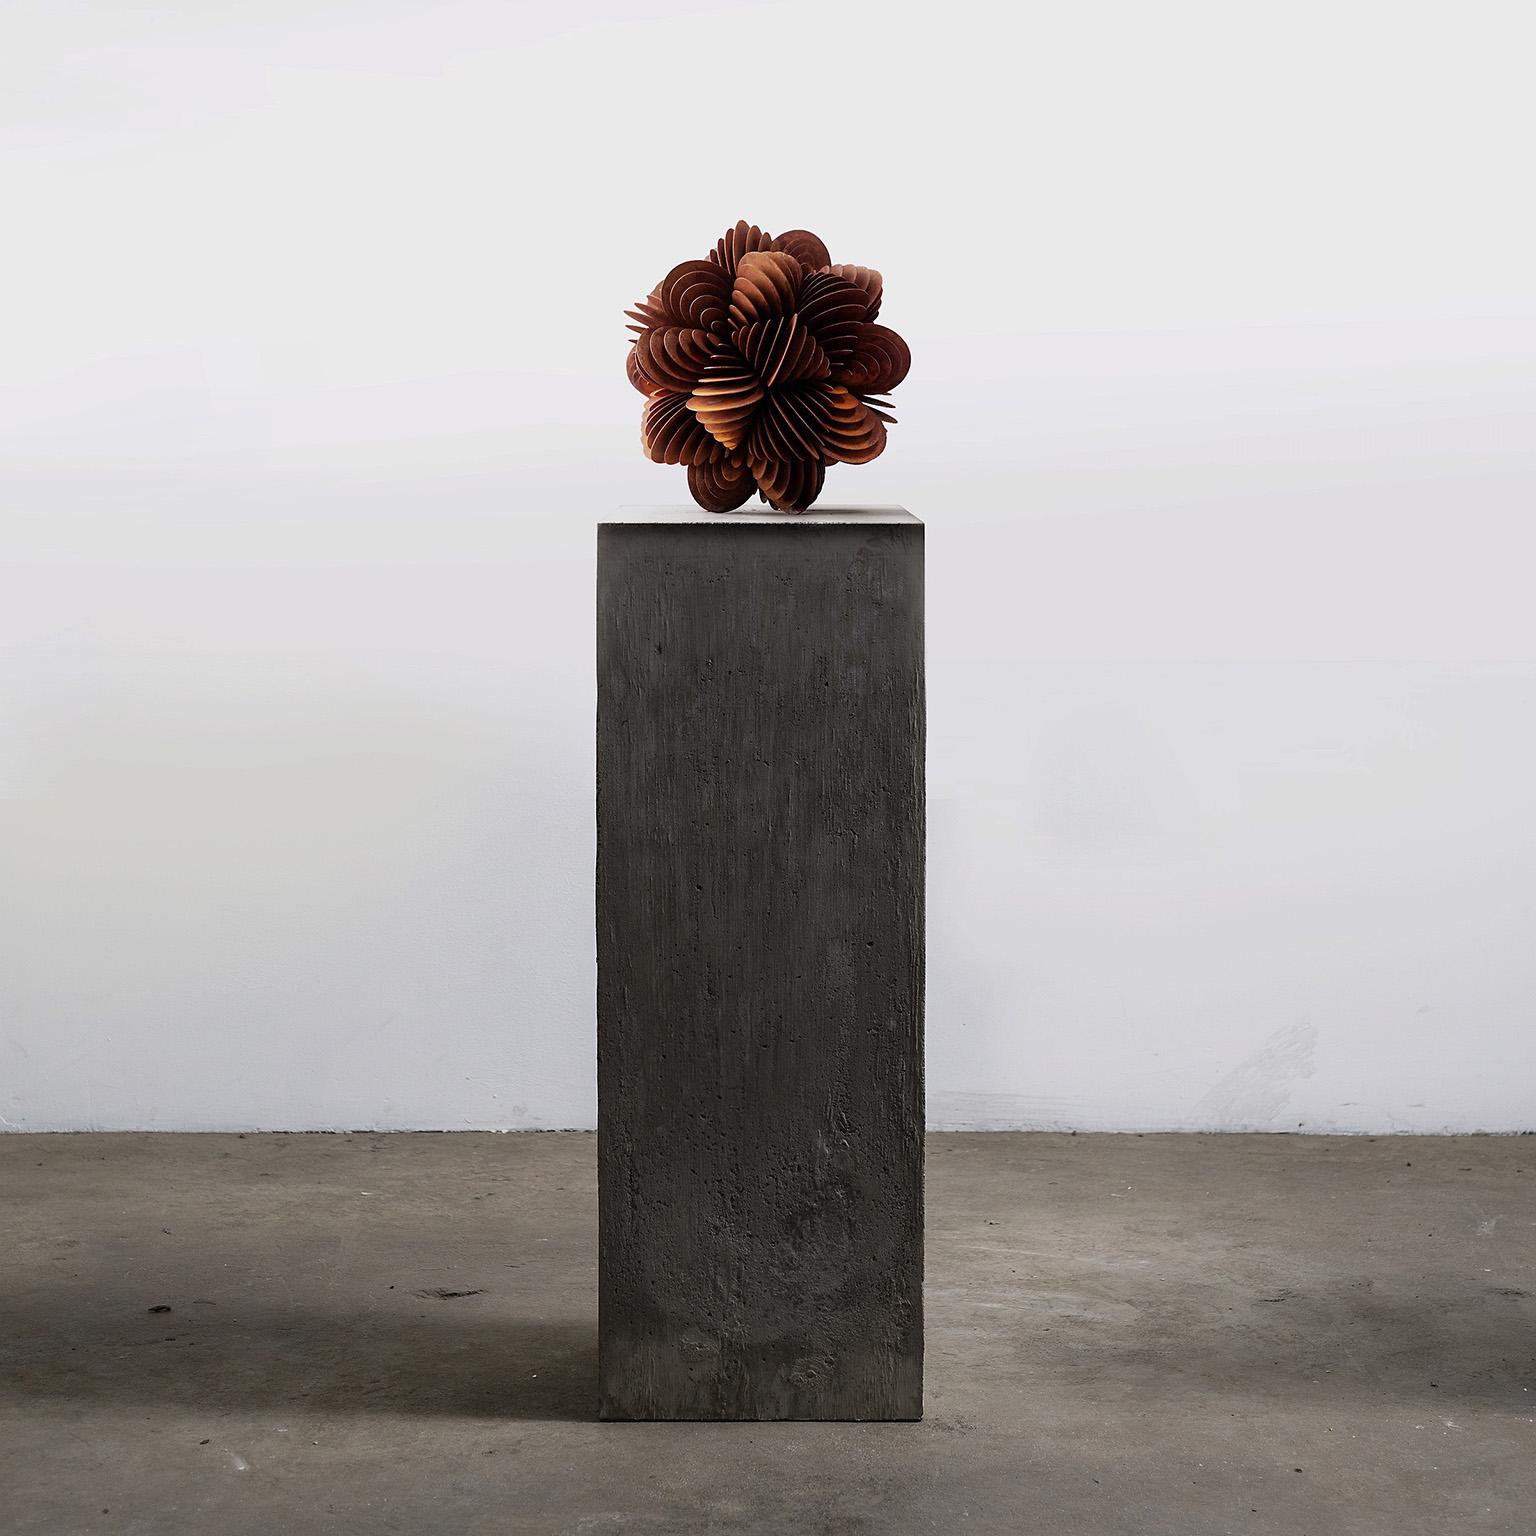 Bloom No. 3 from the Bloom Series by Norman Mooney
Edition of 10 + 2AP
Corten steel

Inspired by the work of the 19th century biologist Ernst Haeckel and his study of microbes, the Bloom series is an exploration into and a study of the geometry of